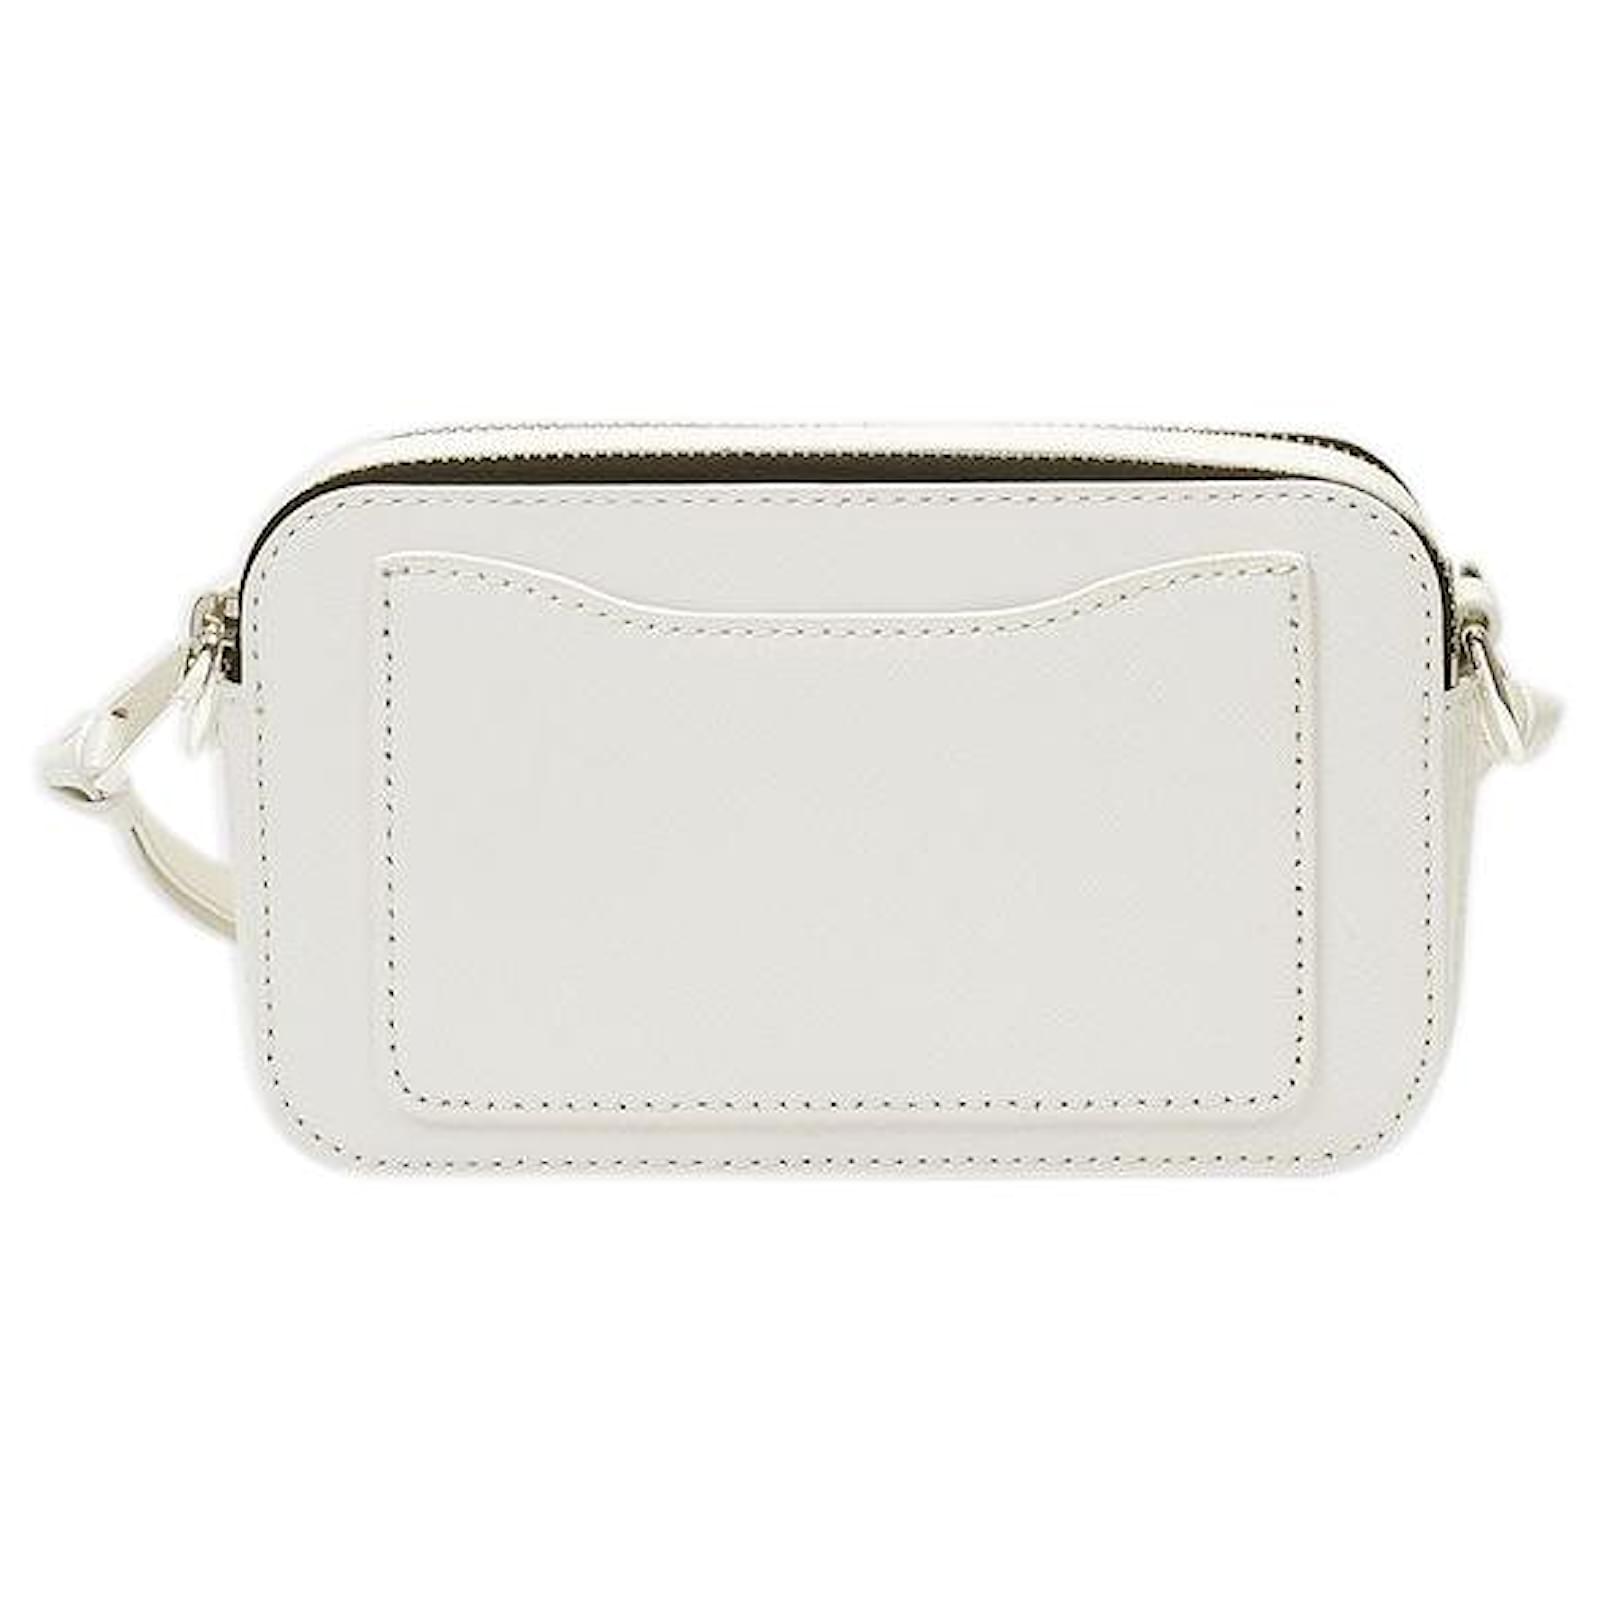 Snapshot leather crossbody bag Marc Jacobs White in Leather - 37418207